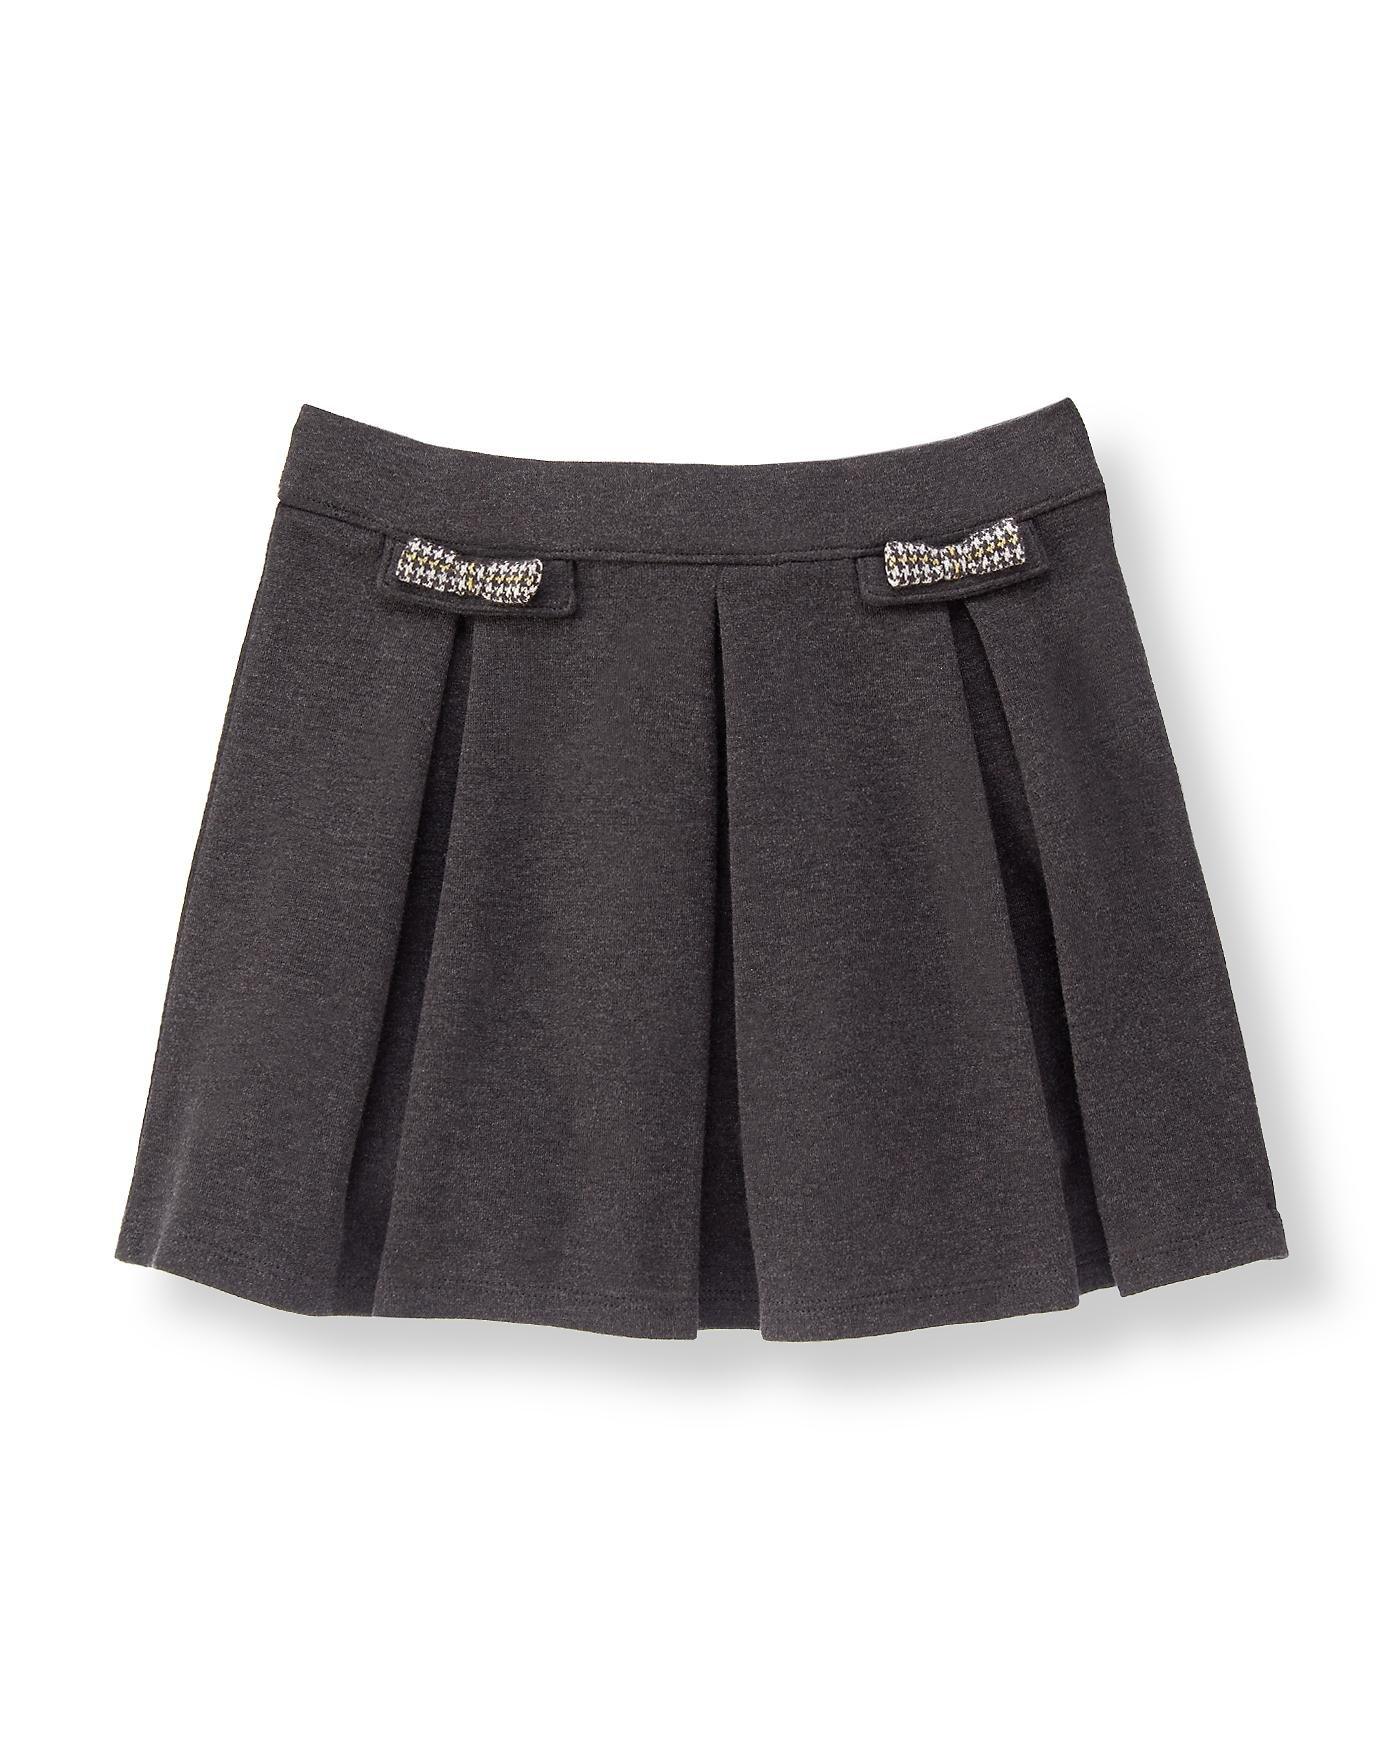 Girl Charcoal Grey Pleated Ponte Skirt by Janie and Jack